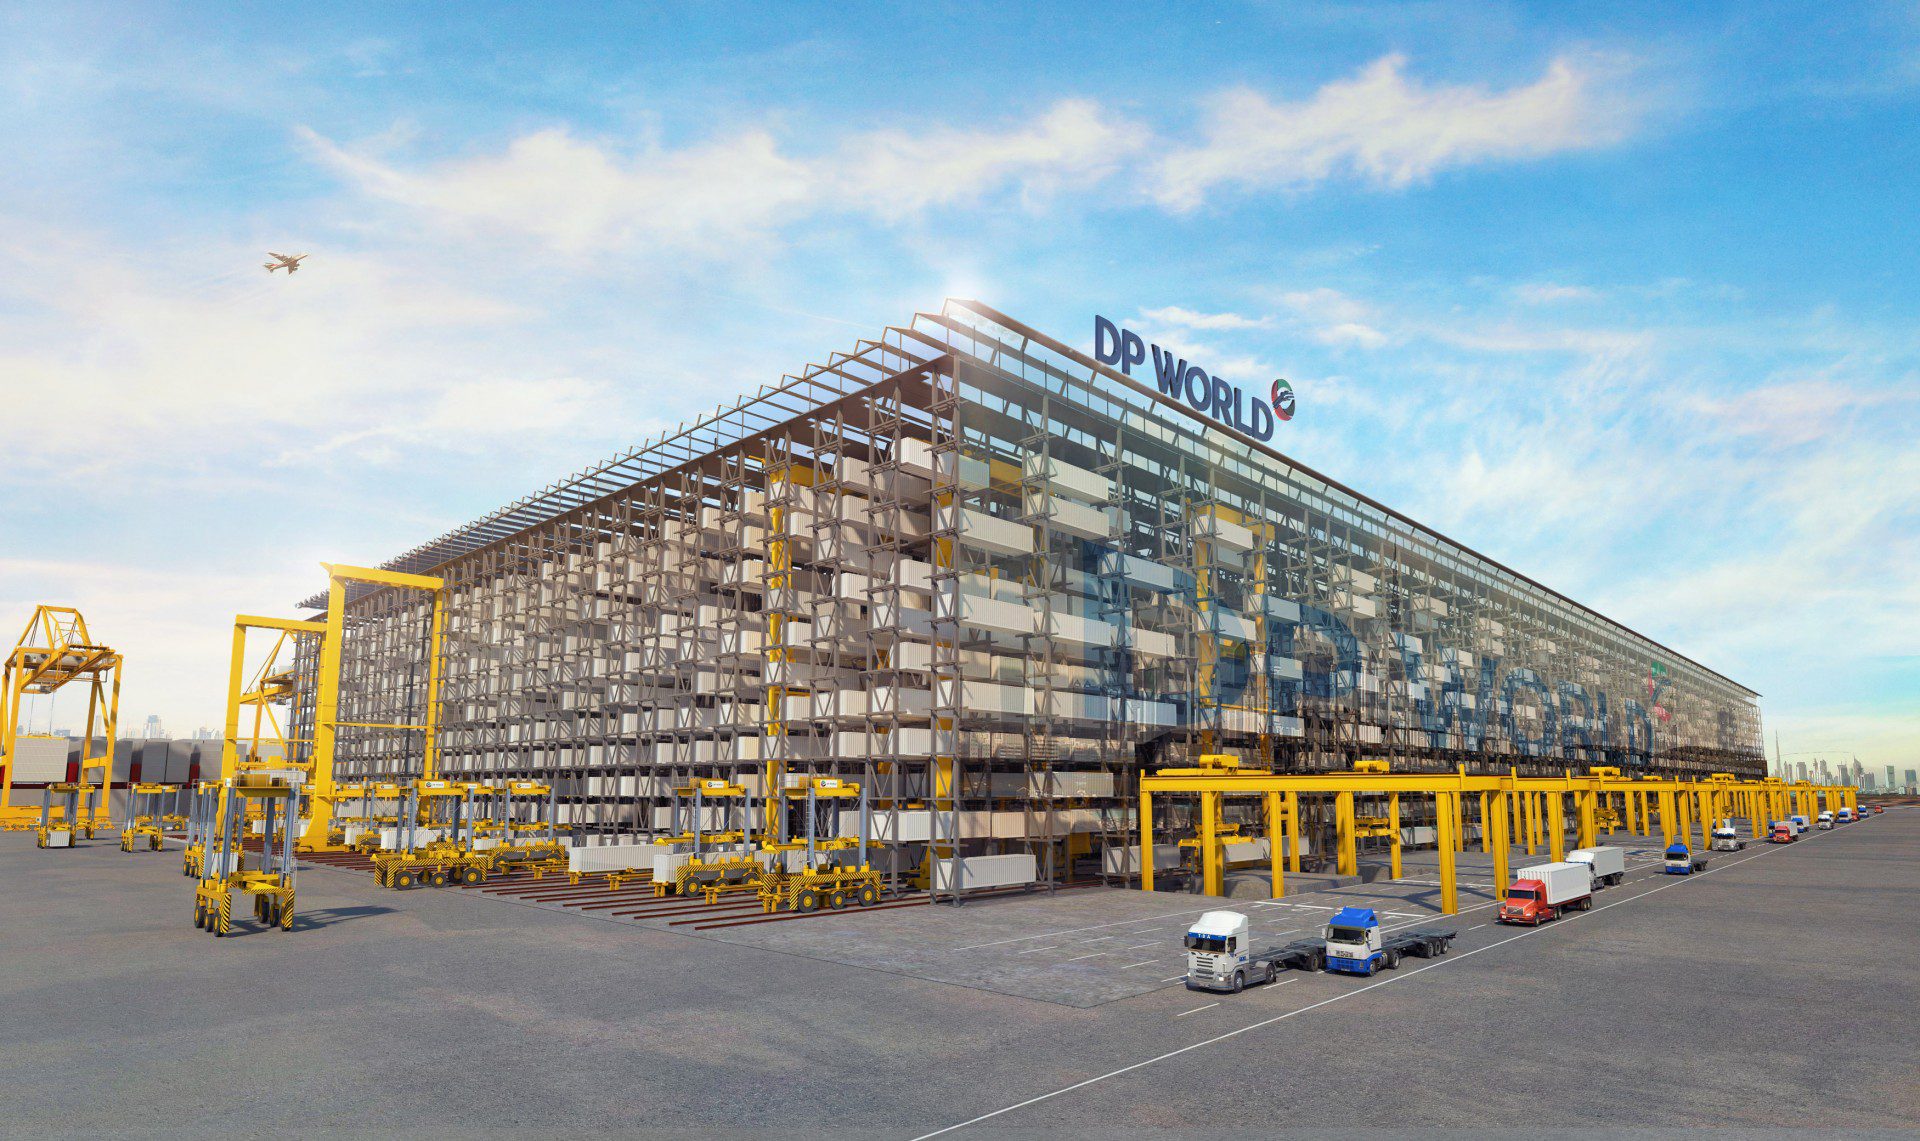 DP World To Install First High-Bay Container Storage System at Pusan Terminal